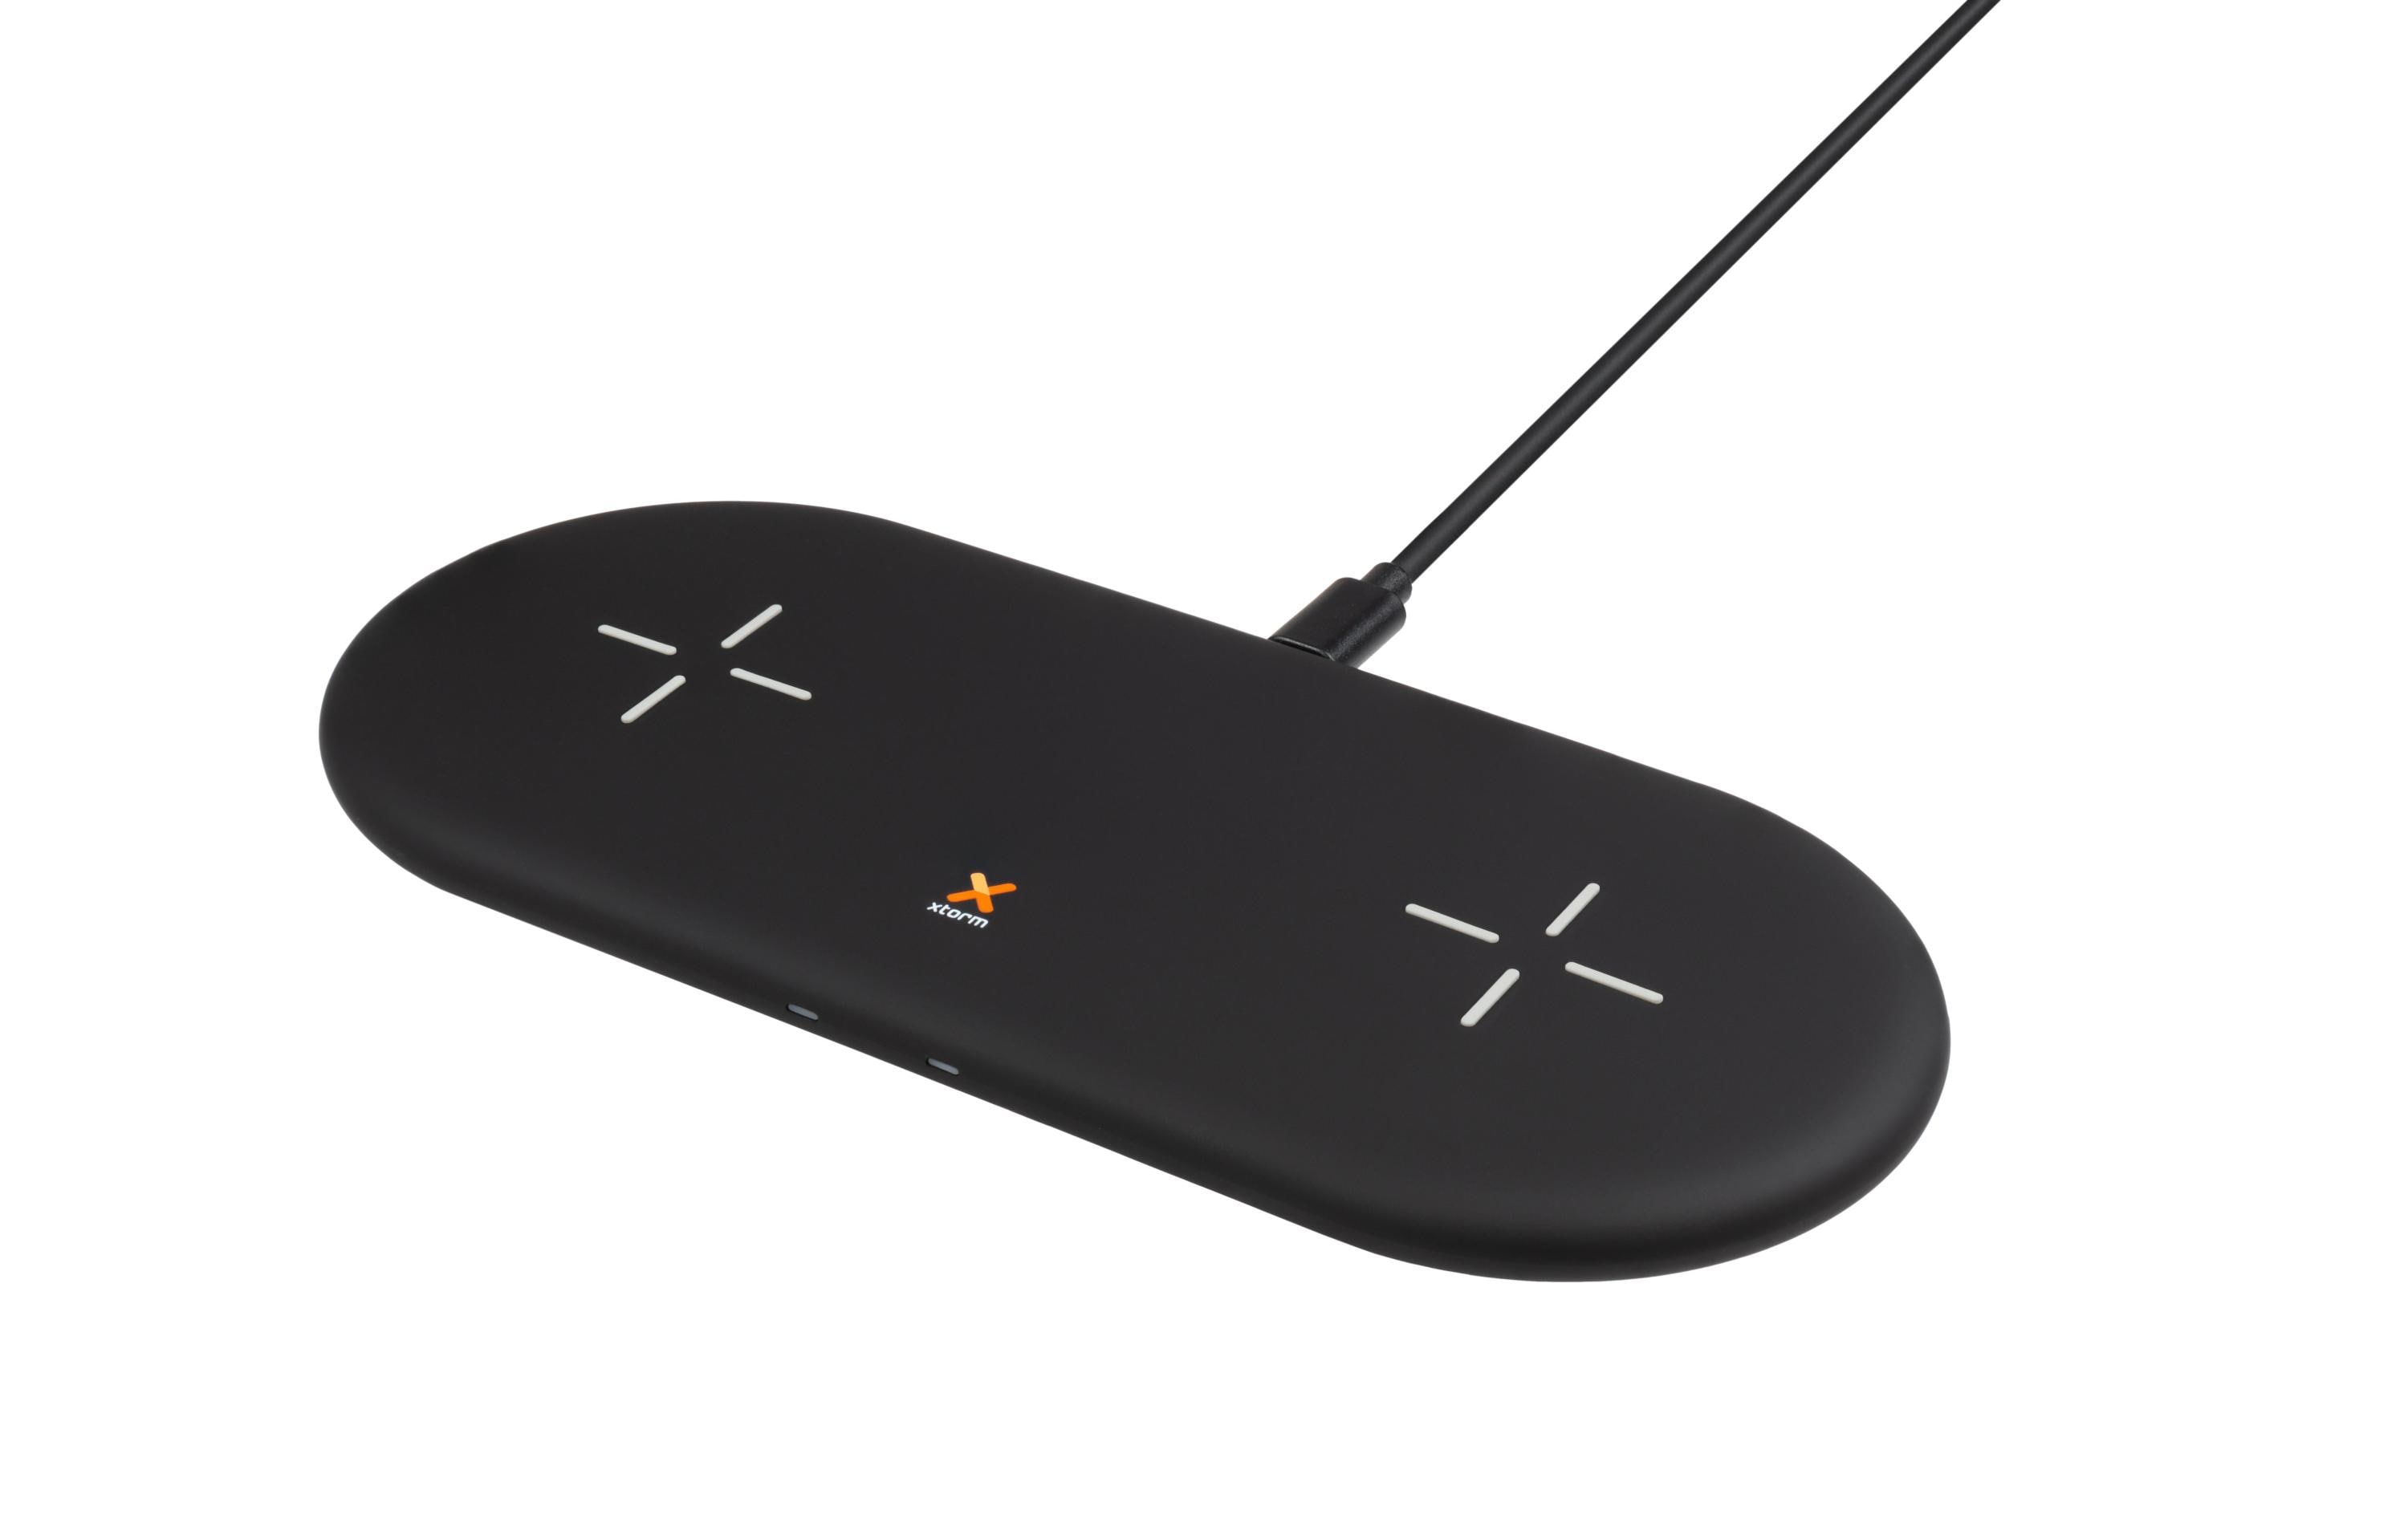 Xtorm Wireless Charger XW208